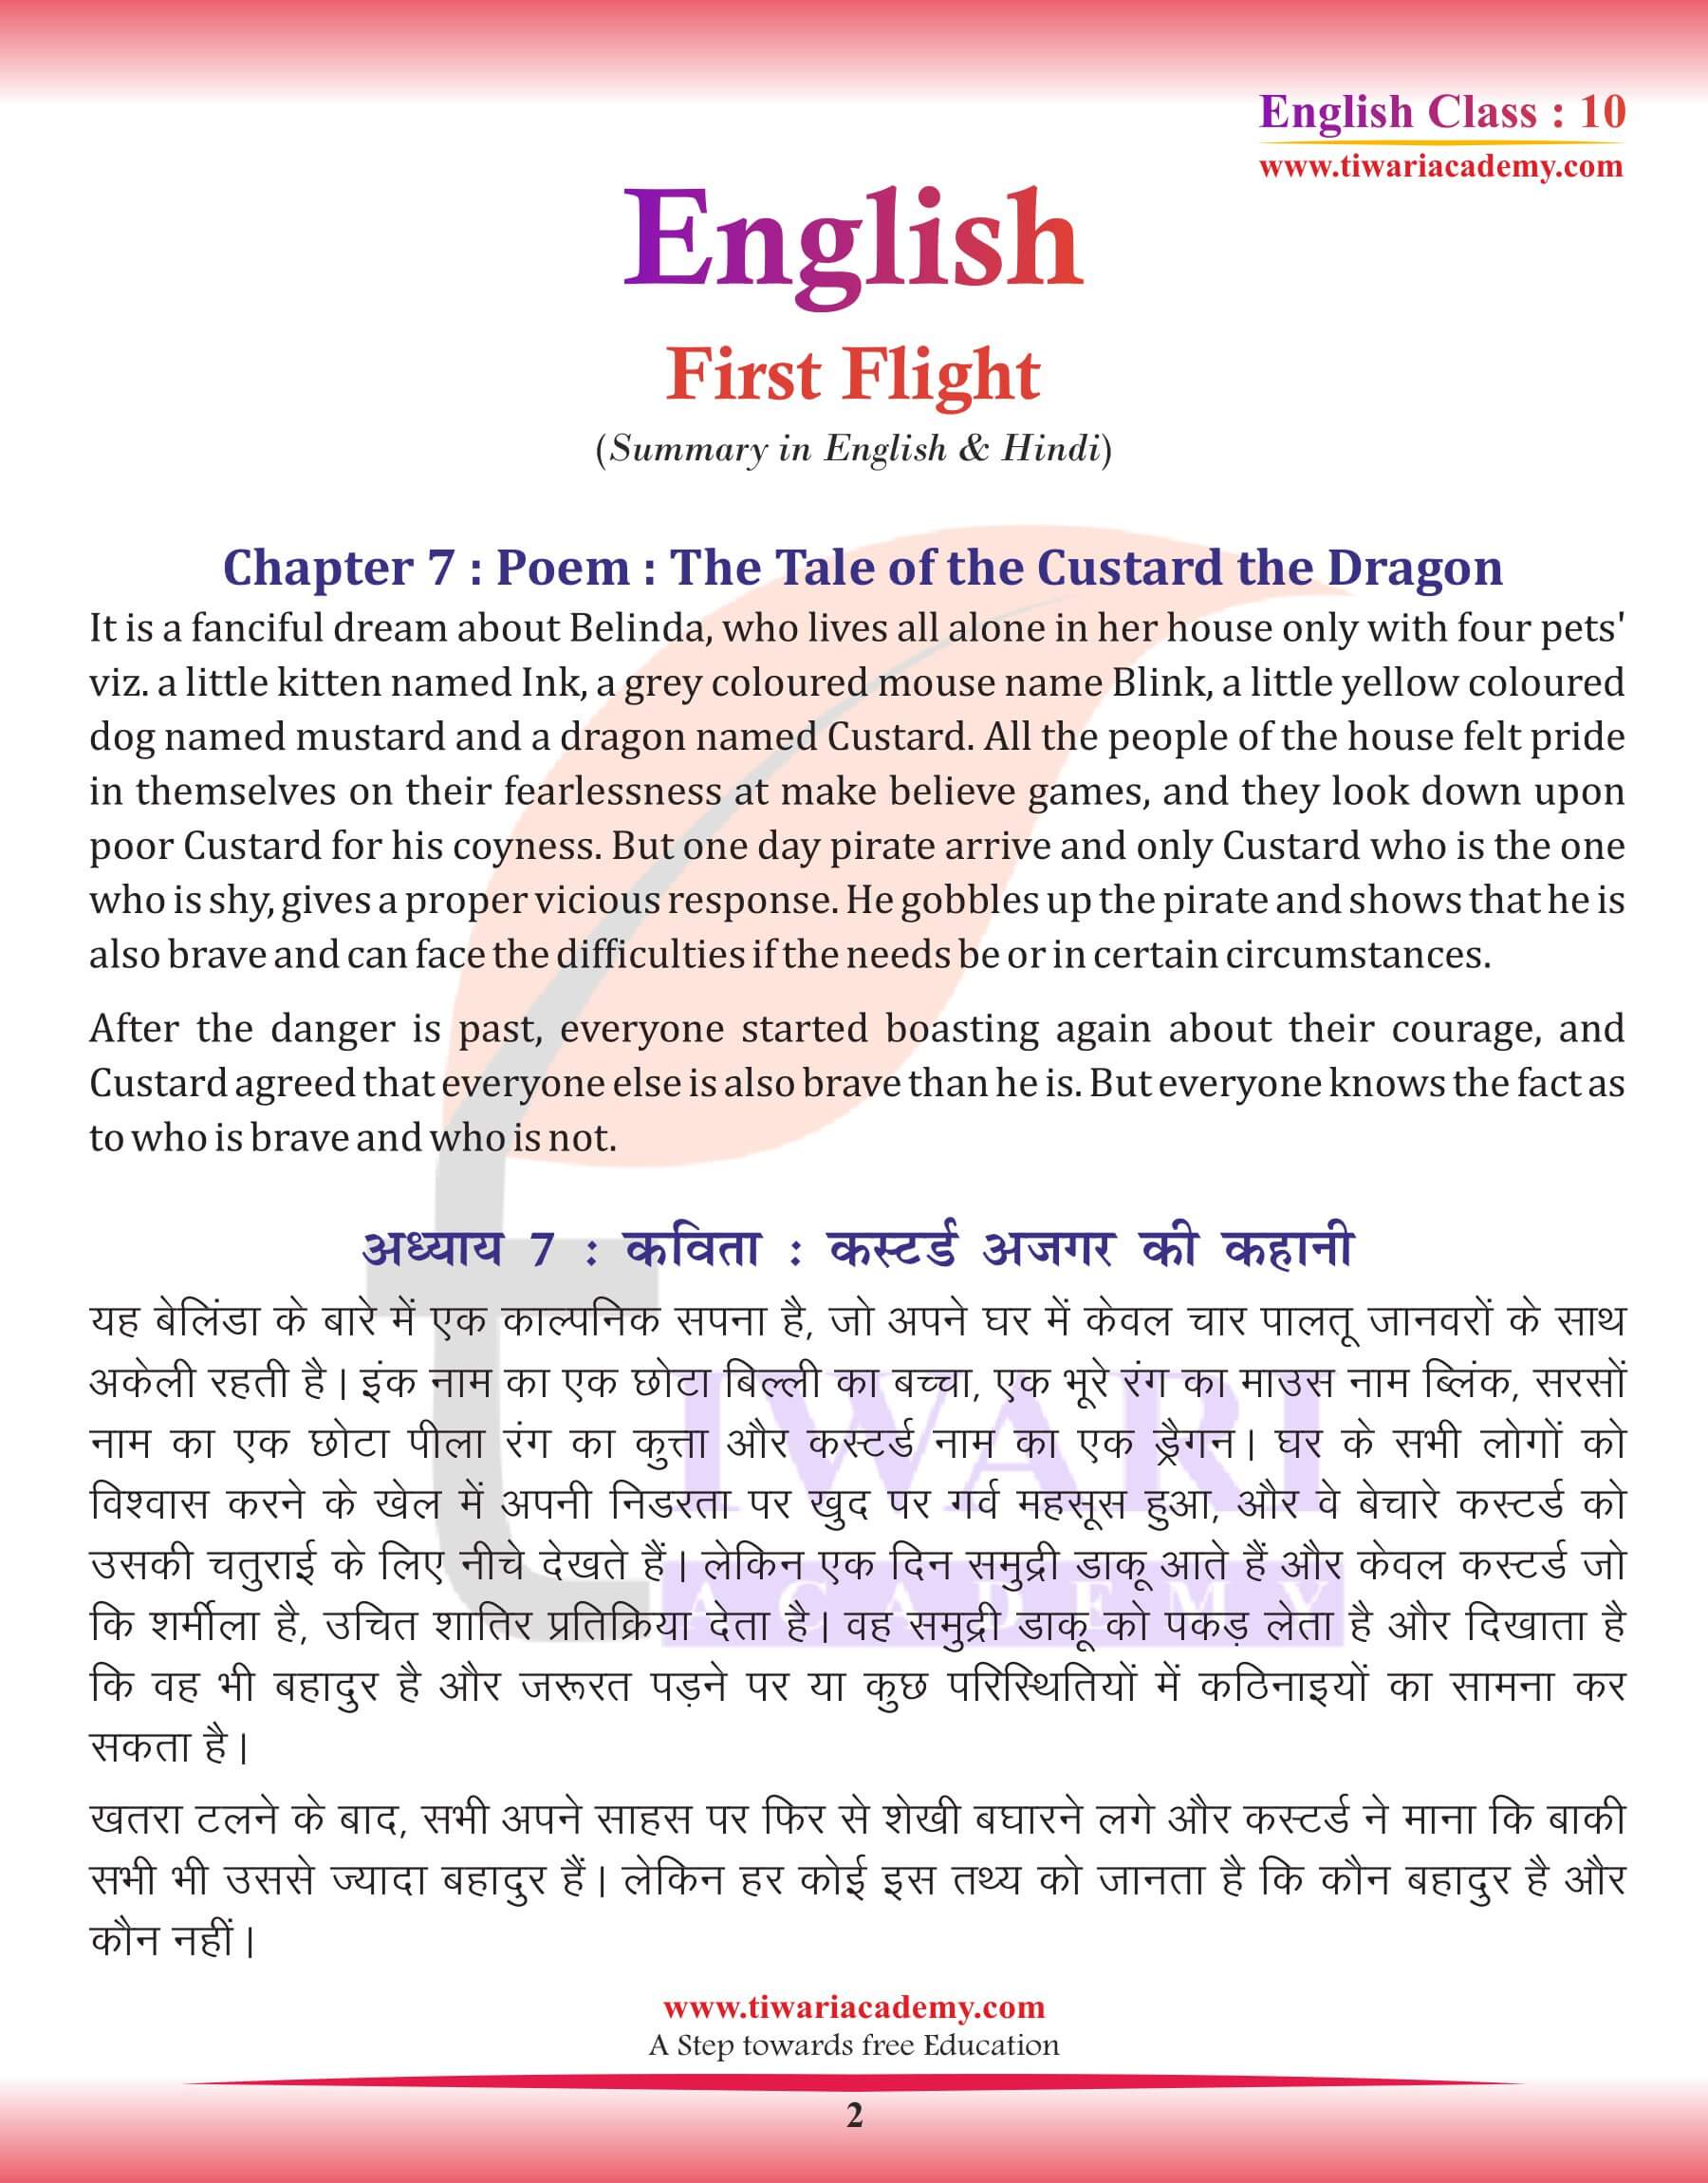 Class 10 English Chapter 7 Summery of poem